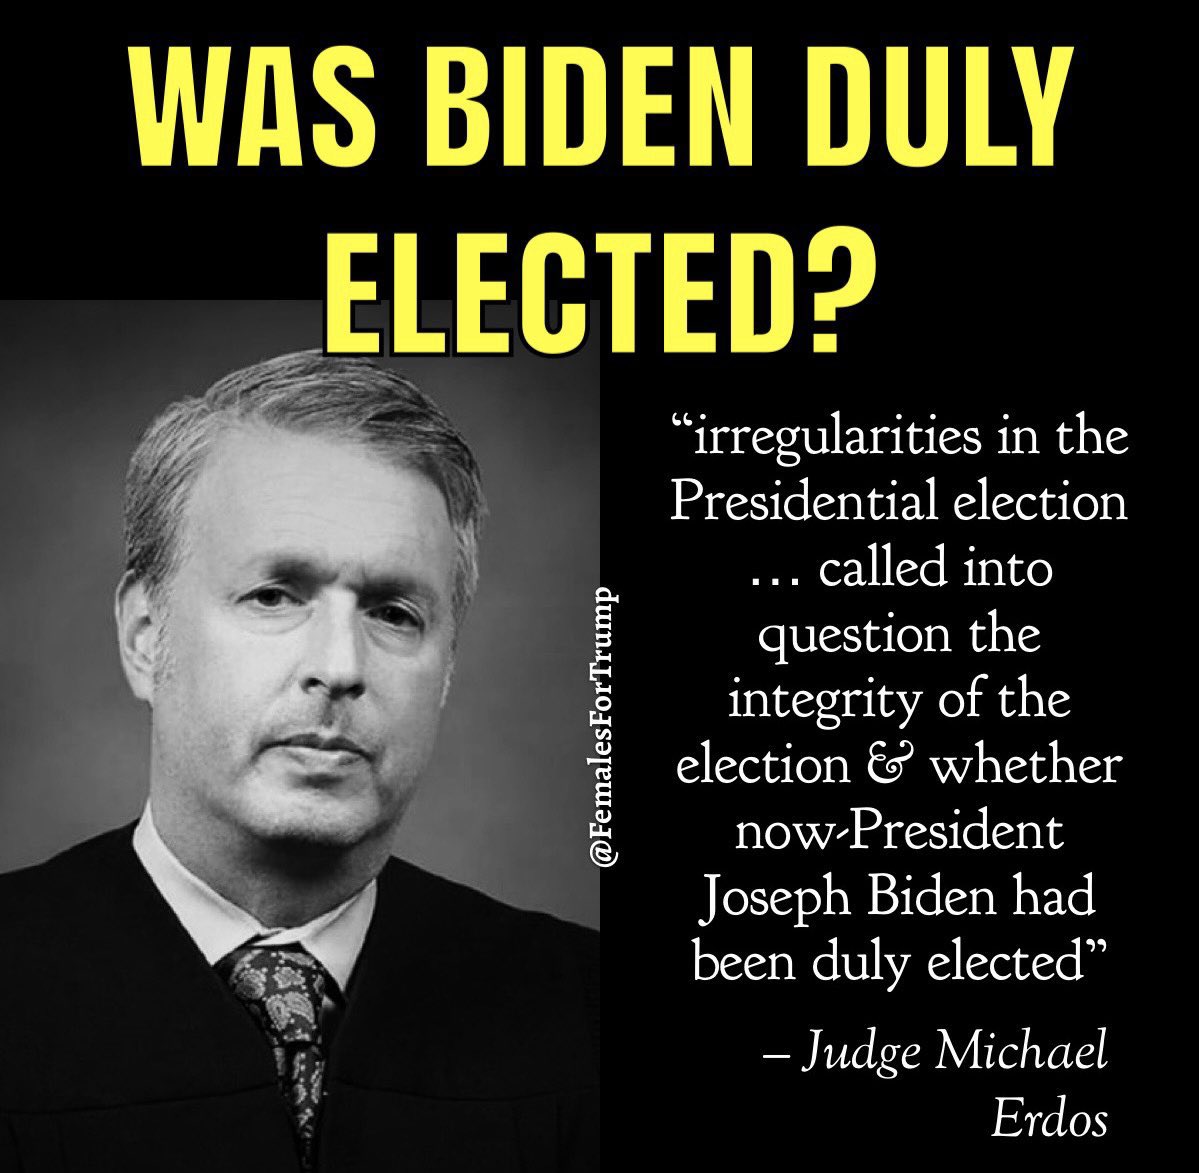 Judge Michael Erdos, Philadelphia County Court in Pennsylvania questions Biden’s legitimacy and the integrity of the 2020 election. Was Biden duly elected?